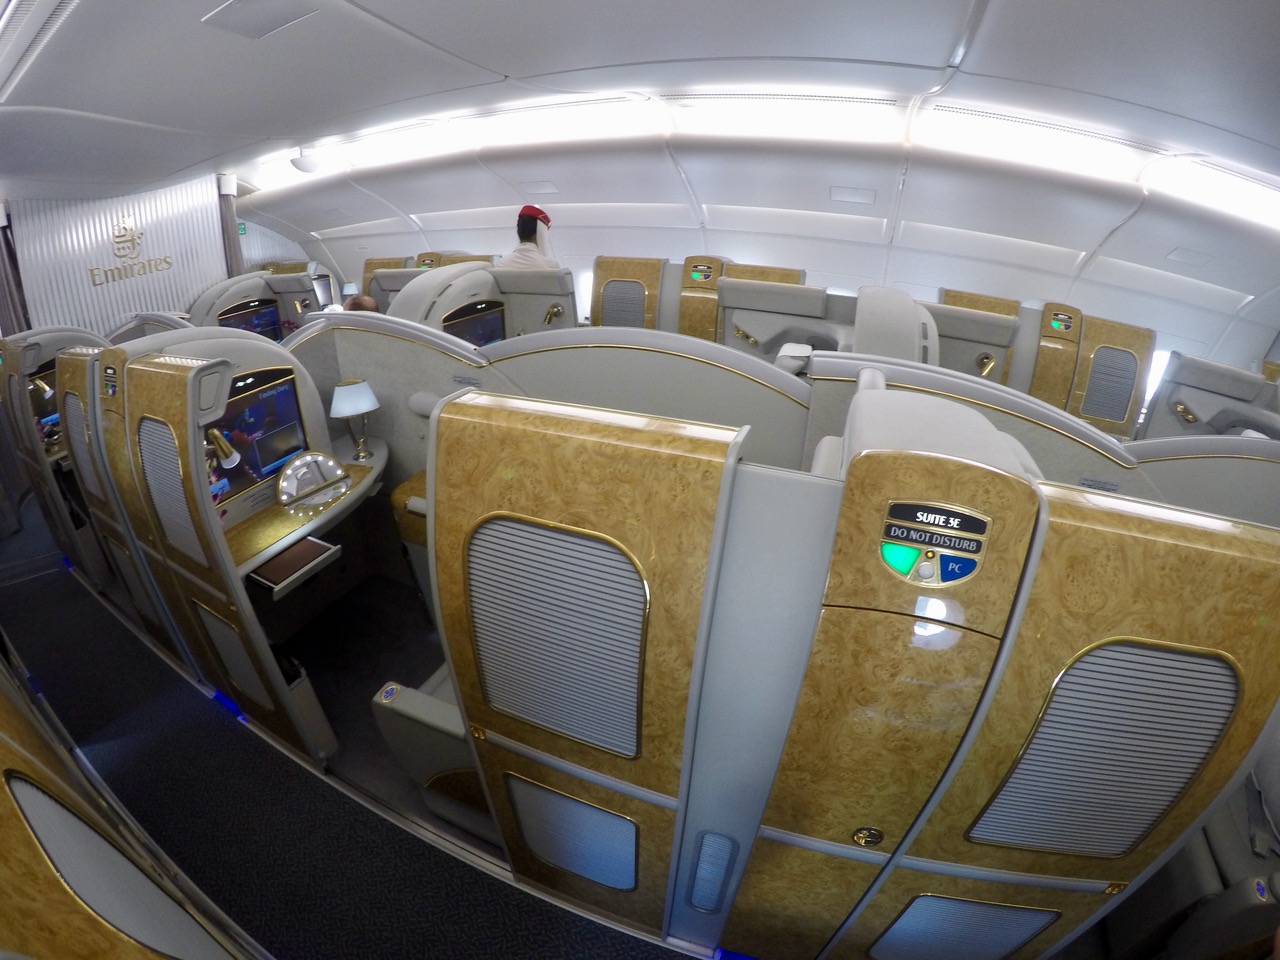 Emirates A380 First Class | Point Hacks